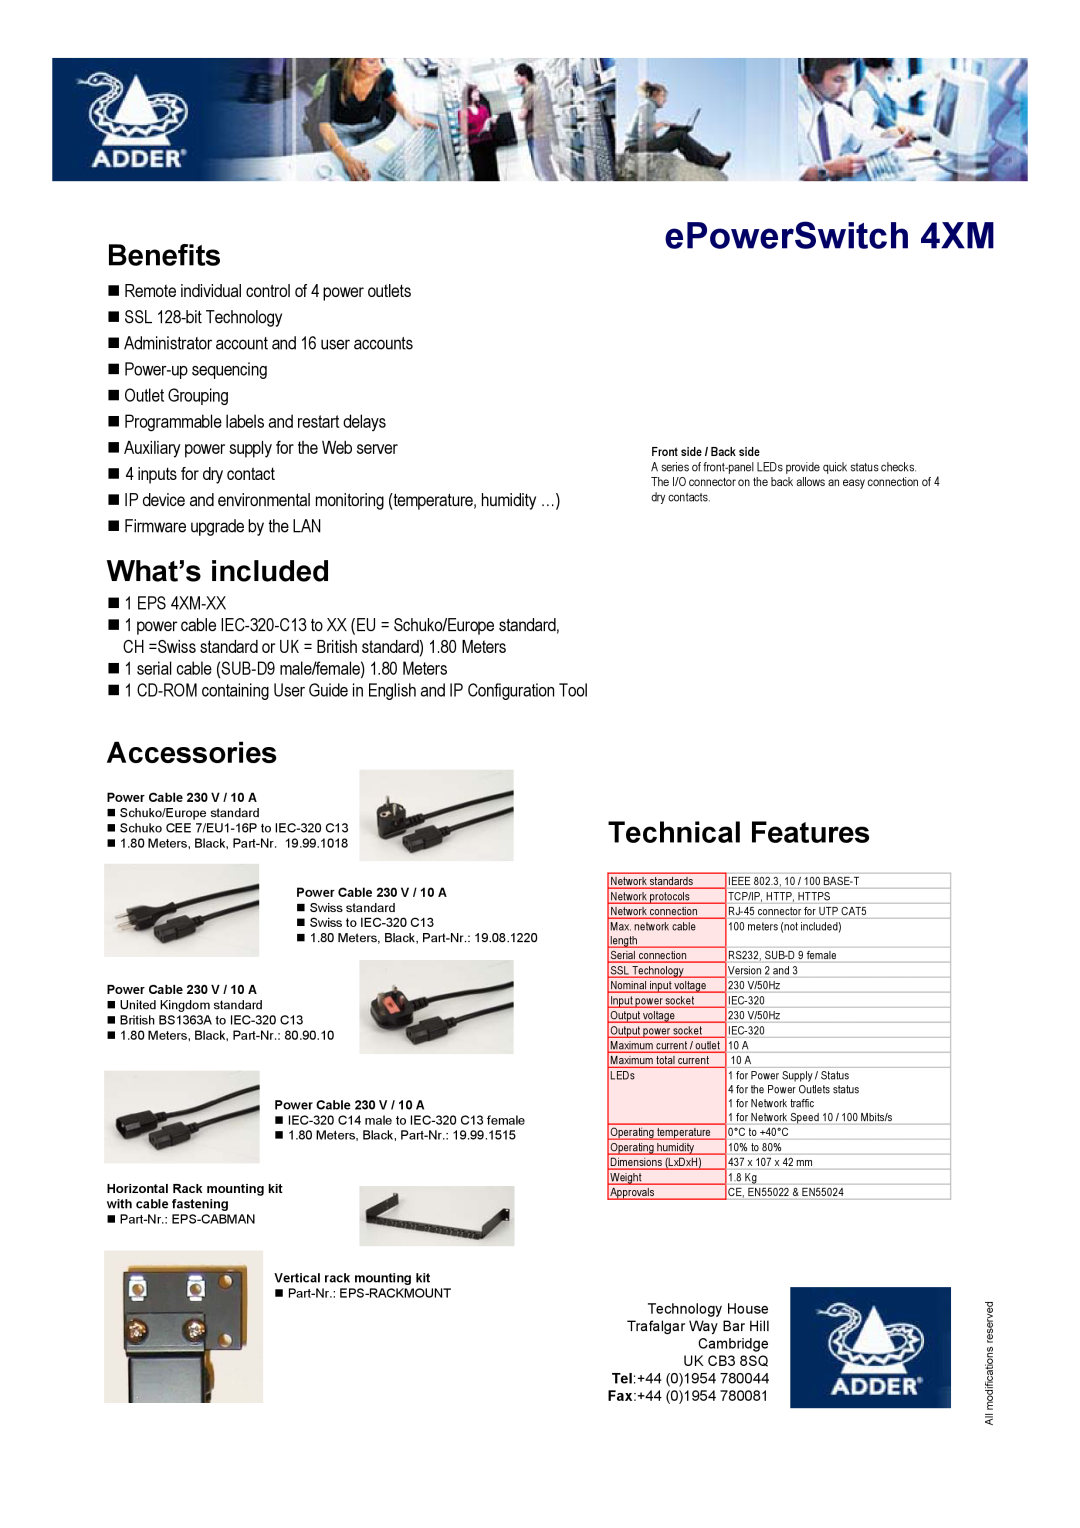 Adder Technology manual Benefits, What’s included, Accessories, Technical Features, ePowerSwitch 4XM 